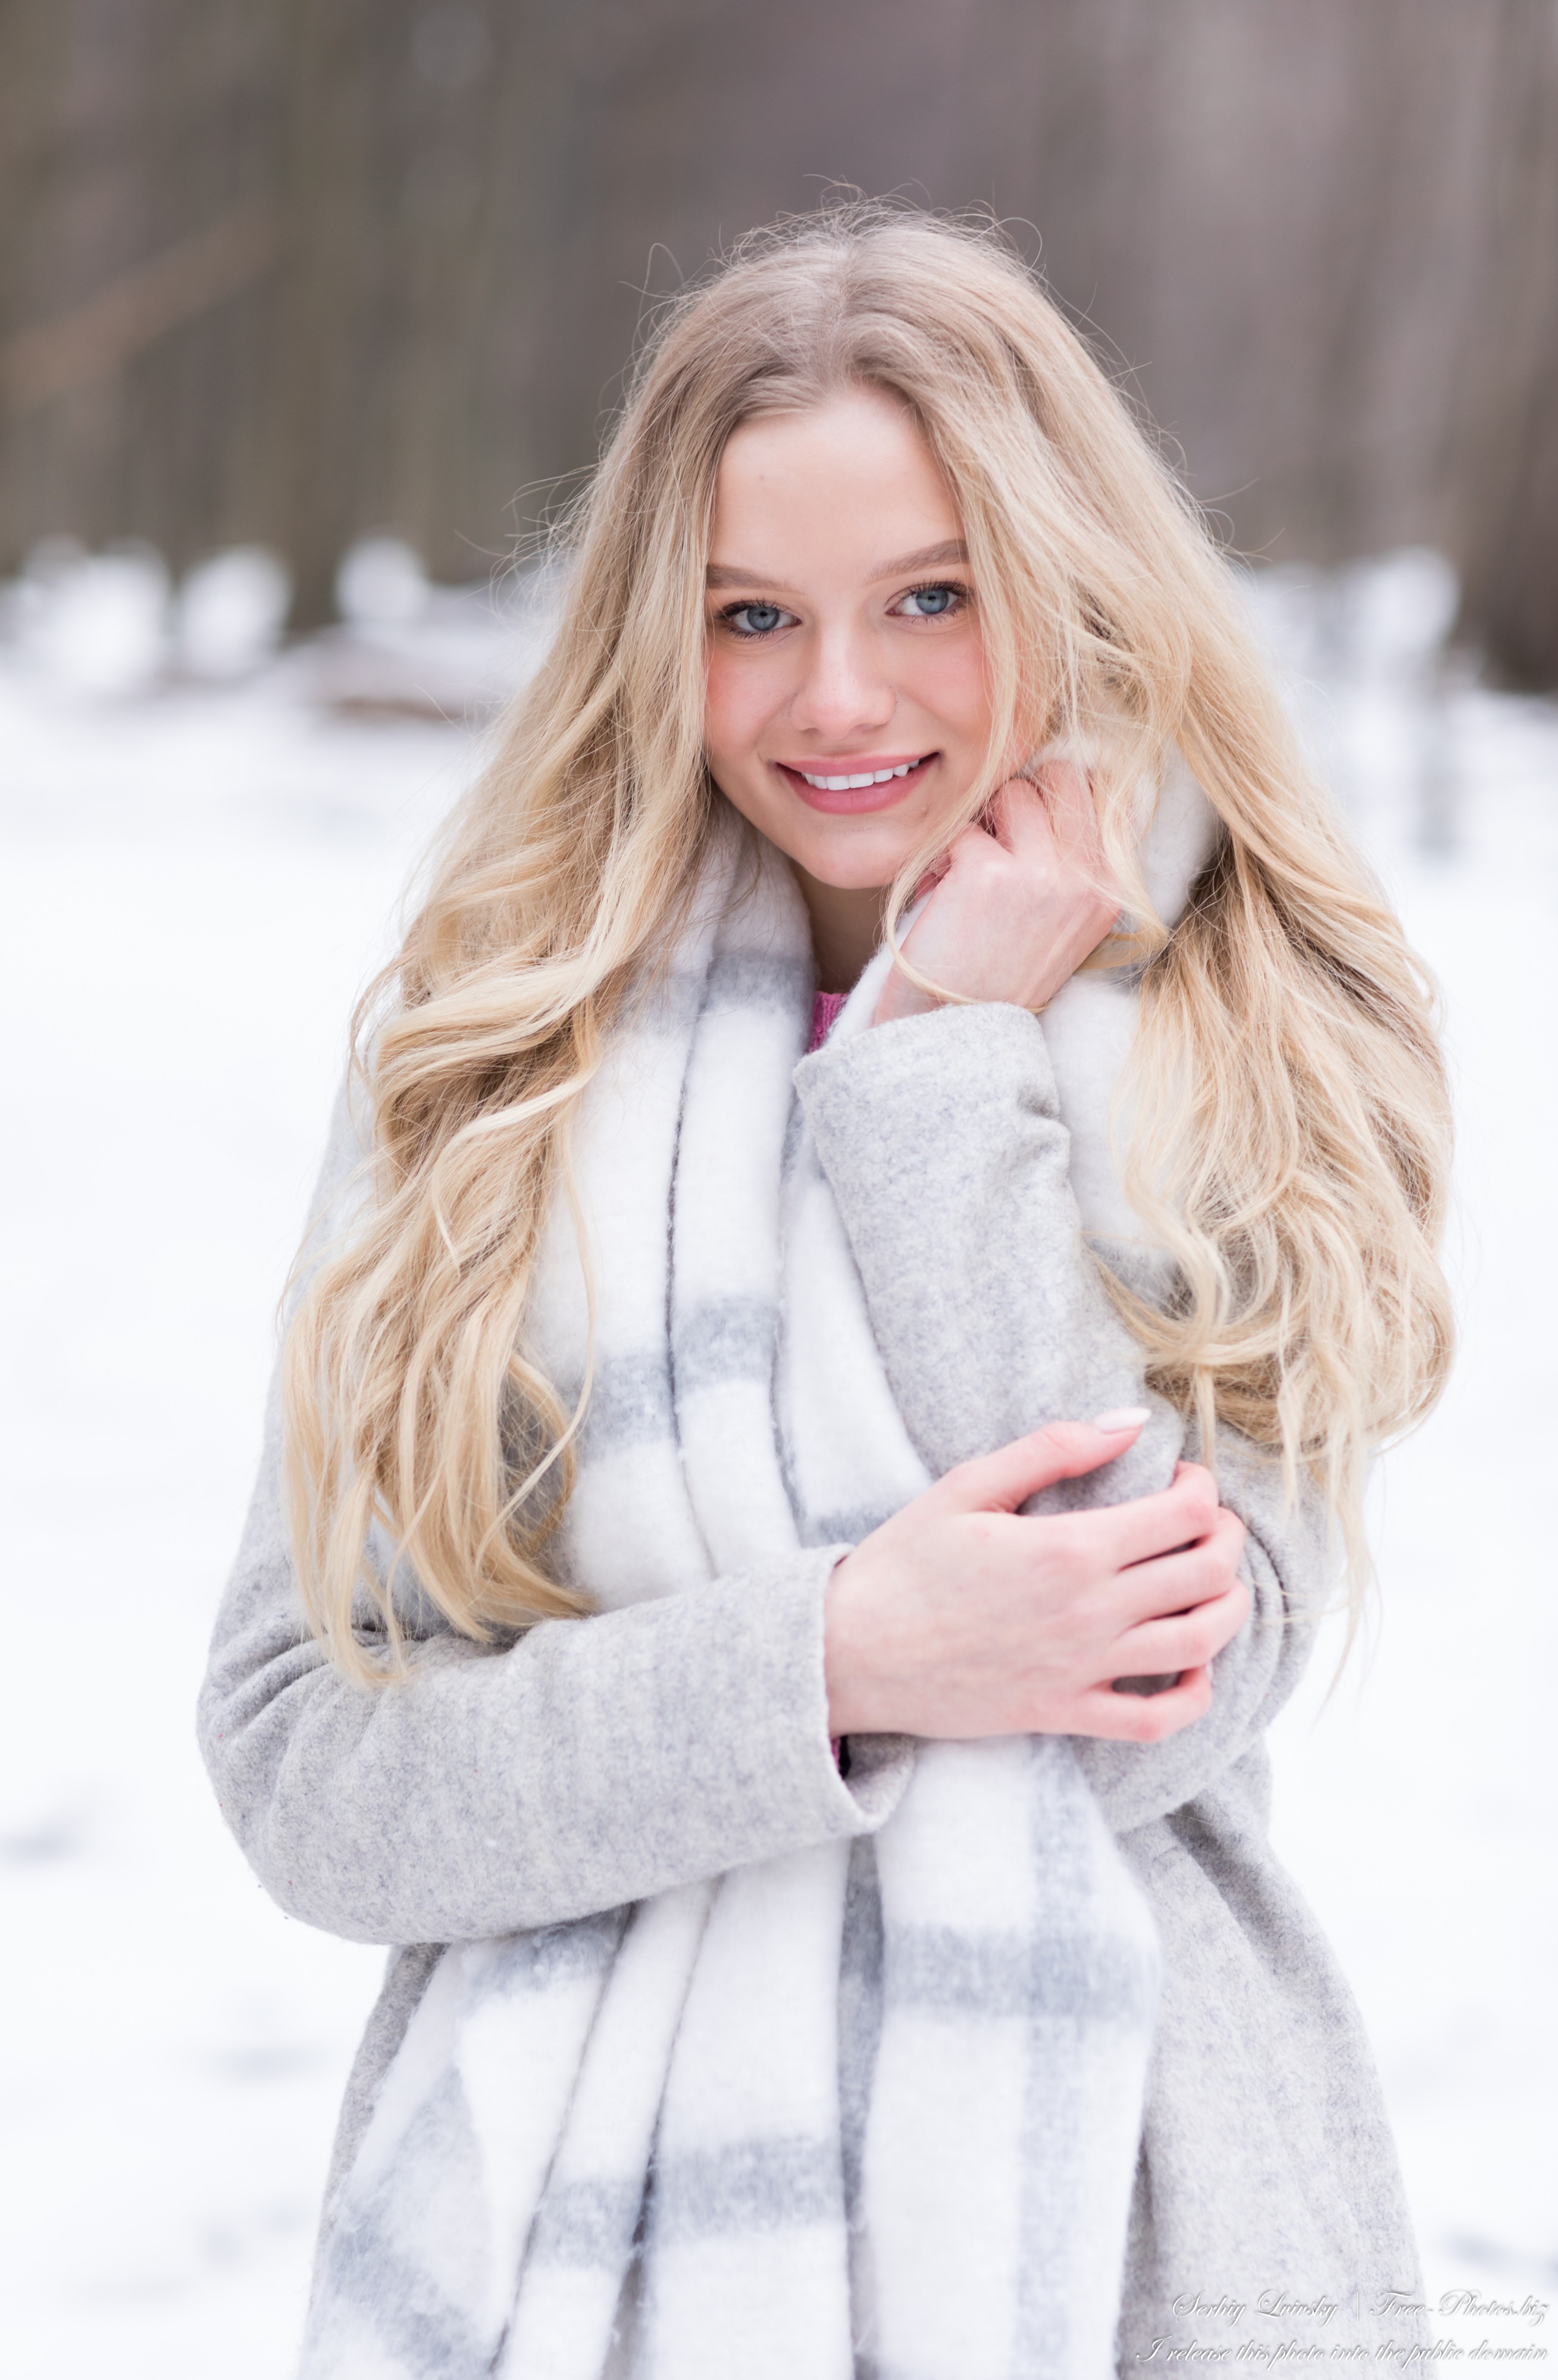 Oksana - a 19-year-old natural blonde girl photographed by Serhiy Lvivsky in March 2021, picture 34